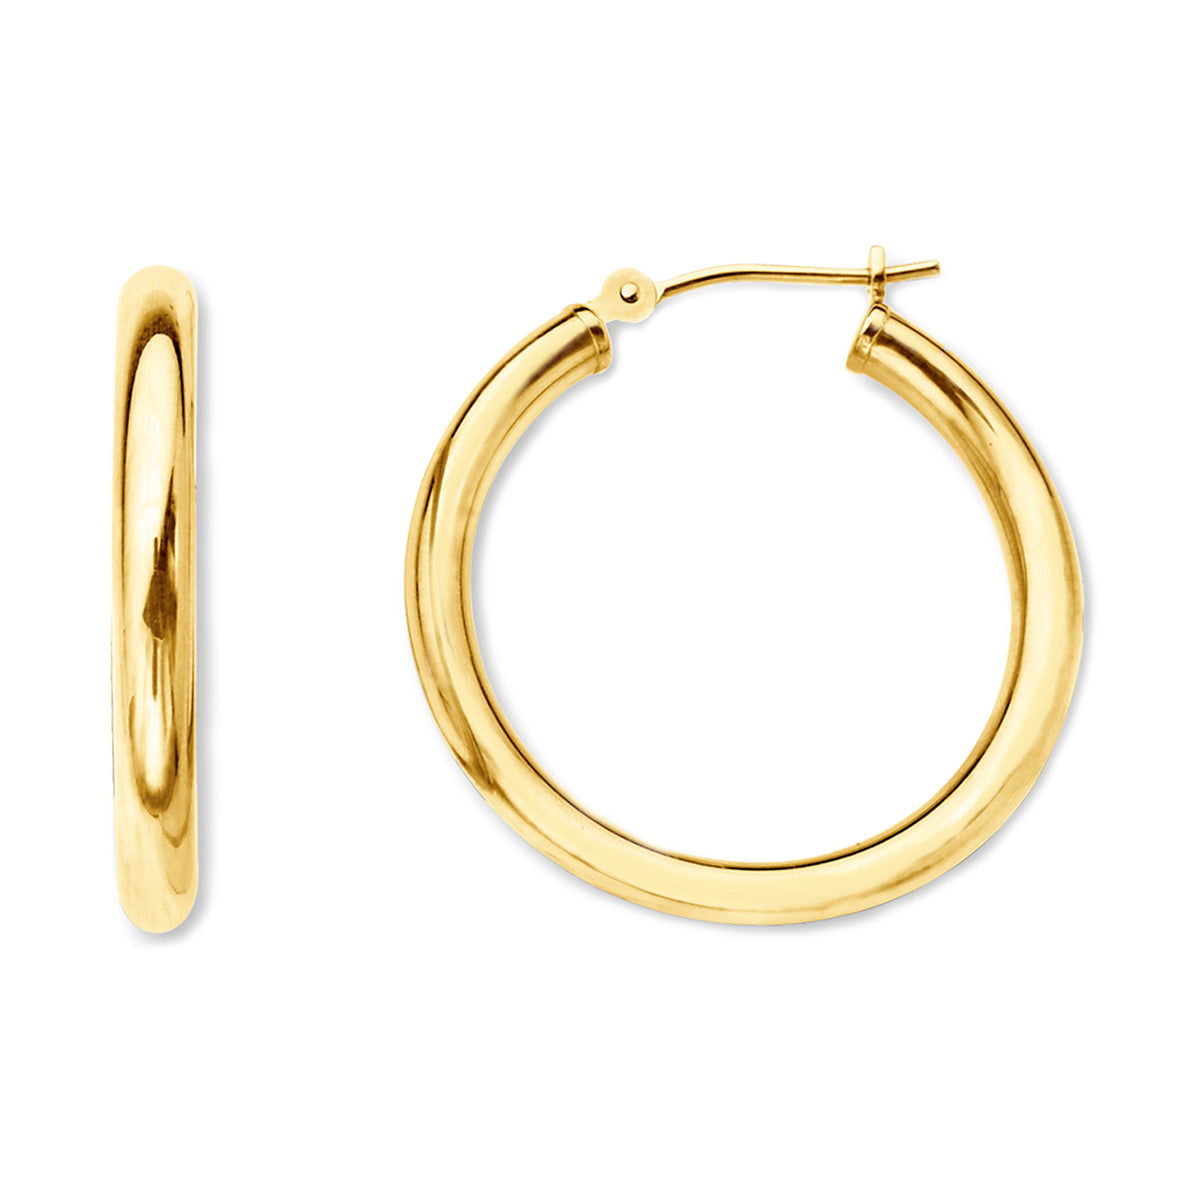 10k Yellow Gold 2mm Shiny Round Tube Hoop Earrings fine designer jewelry for men and women